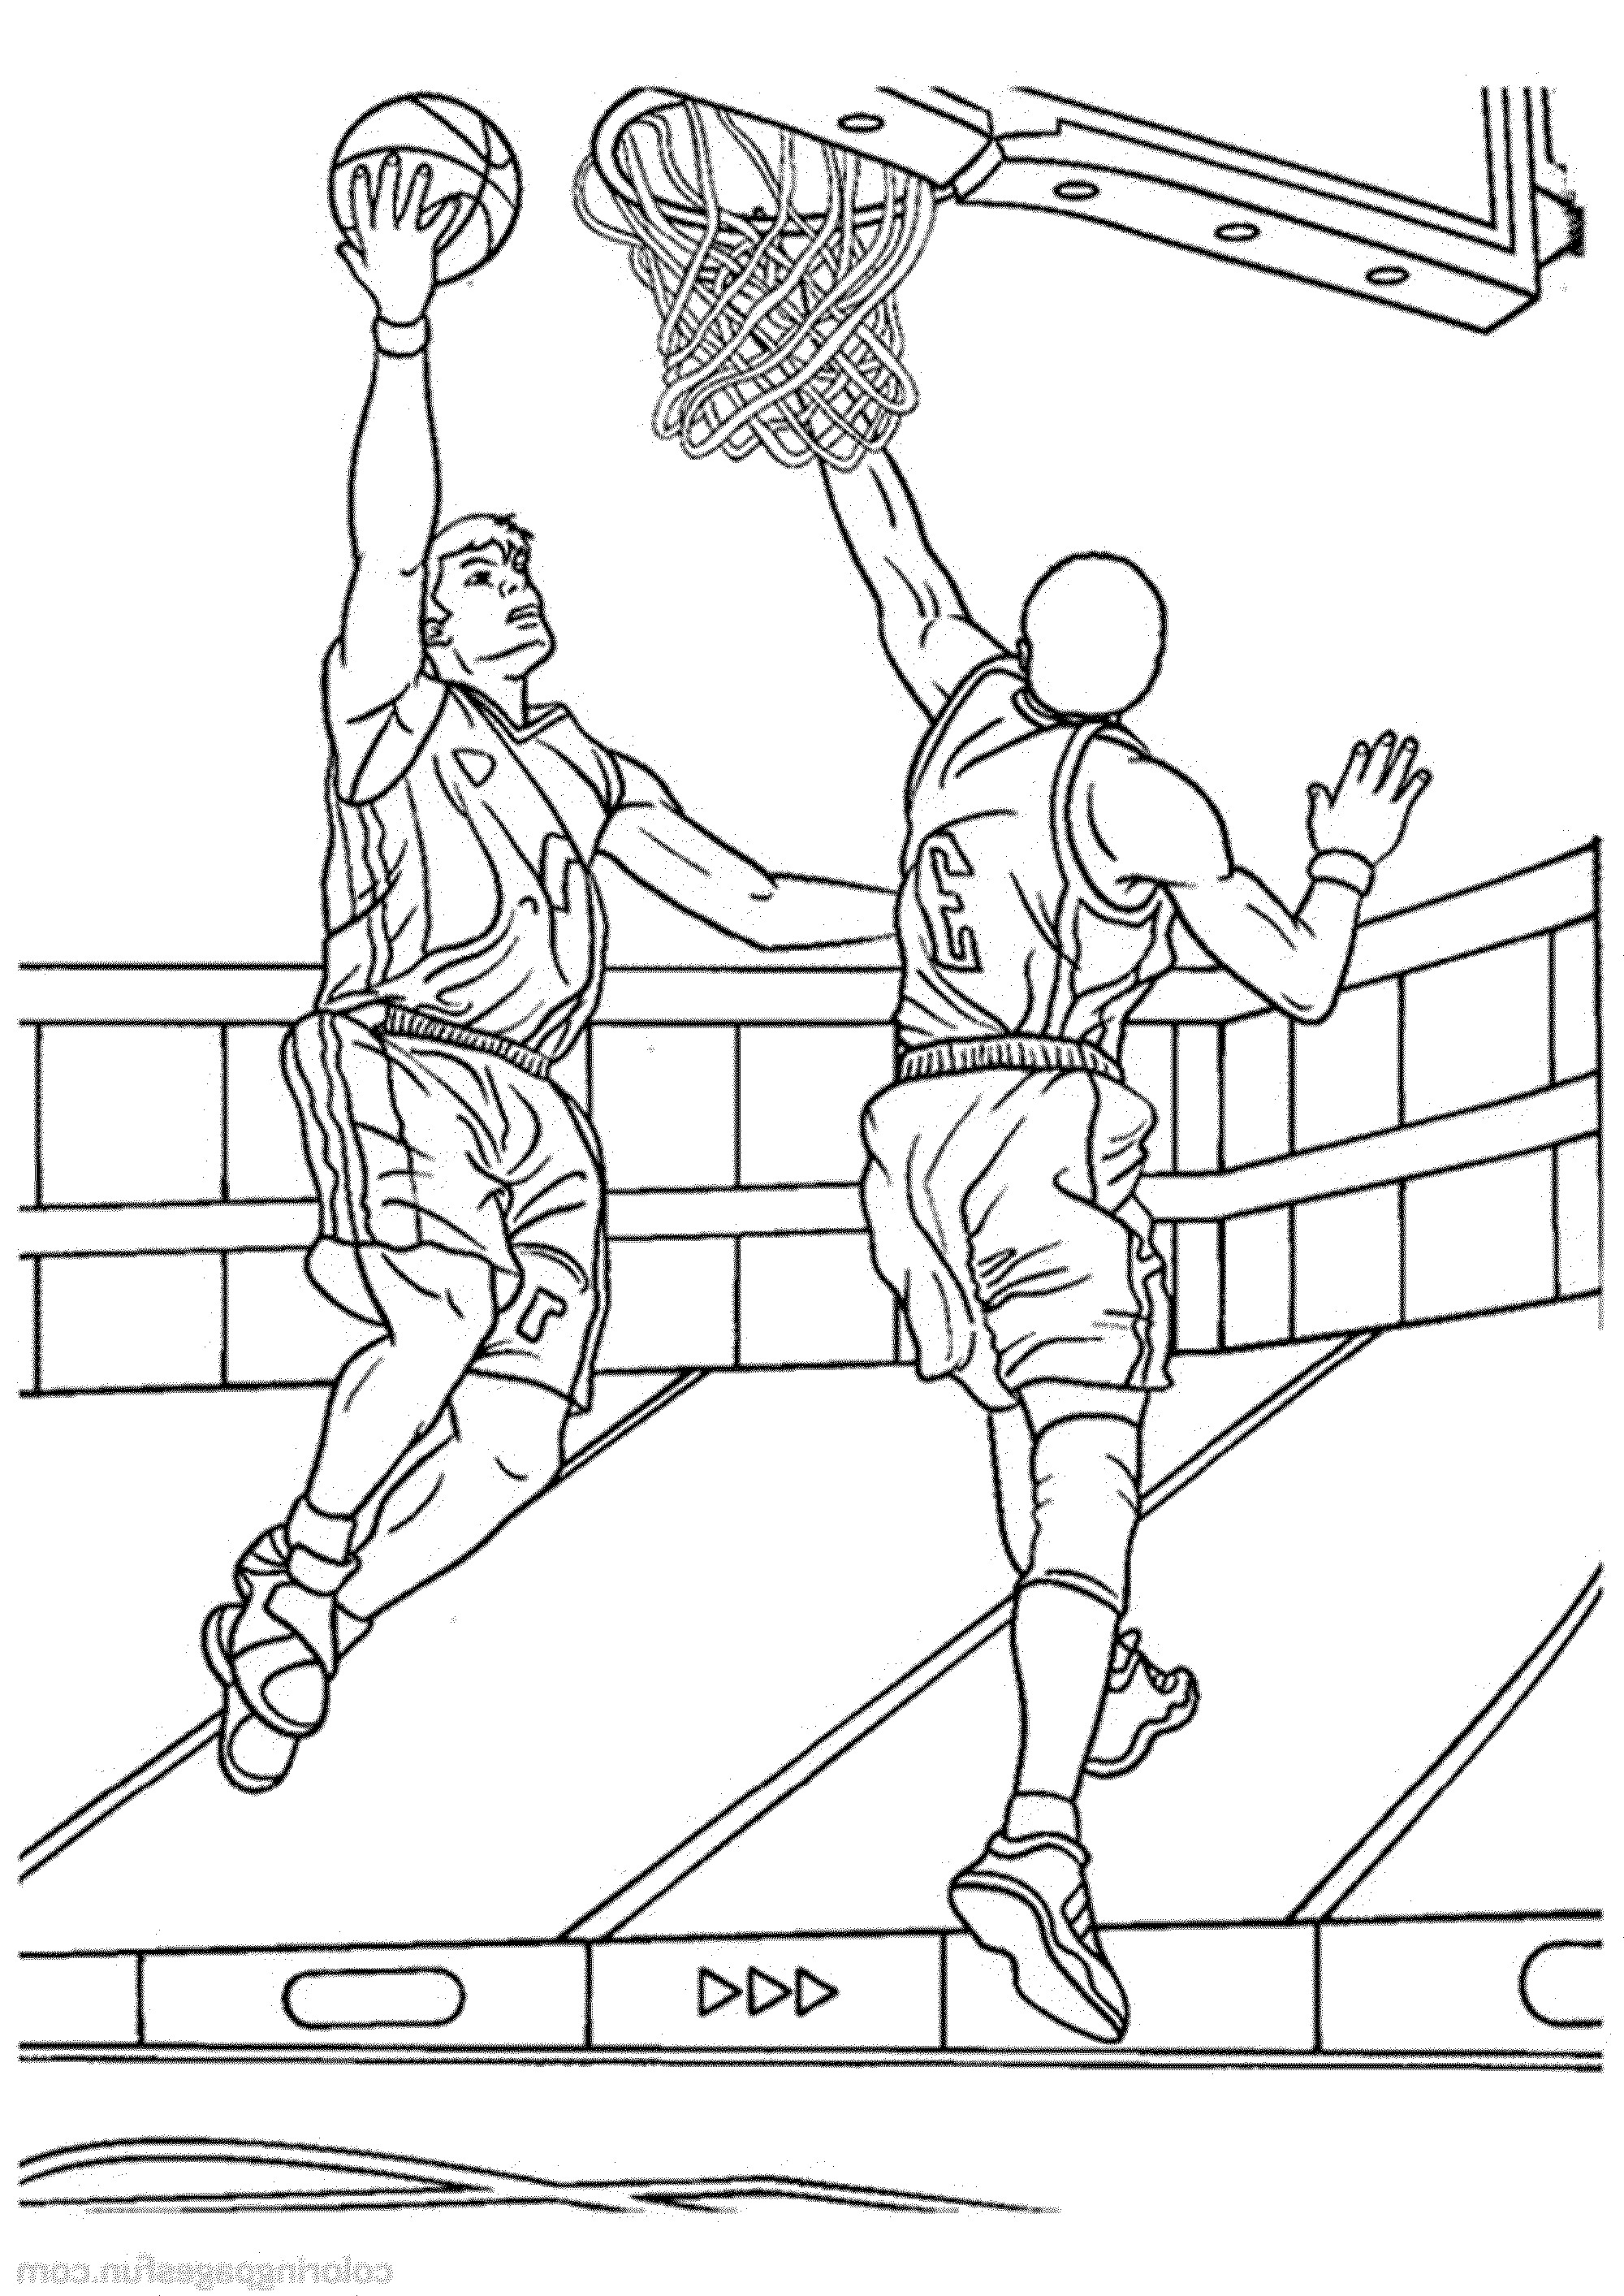 Basketball Coloring Book
 Print & Download Interesting Basketball Coloring Pages